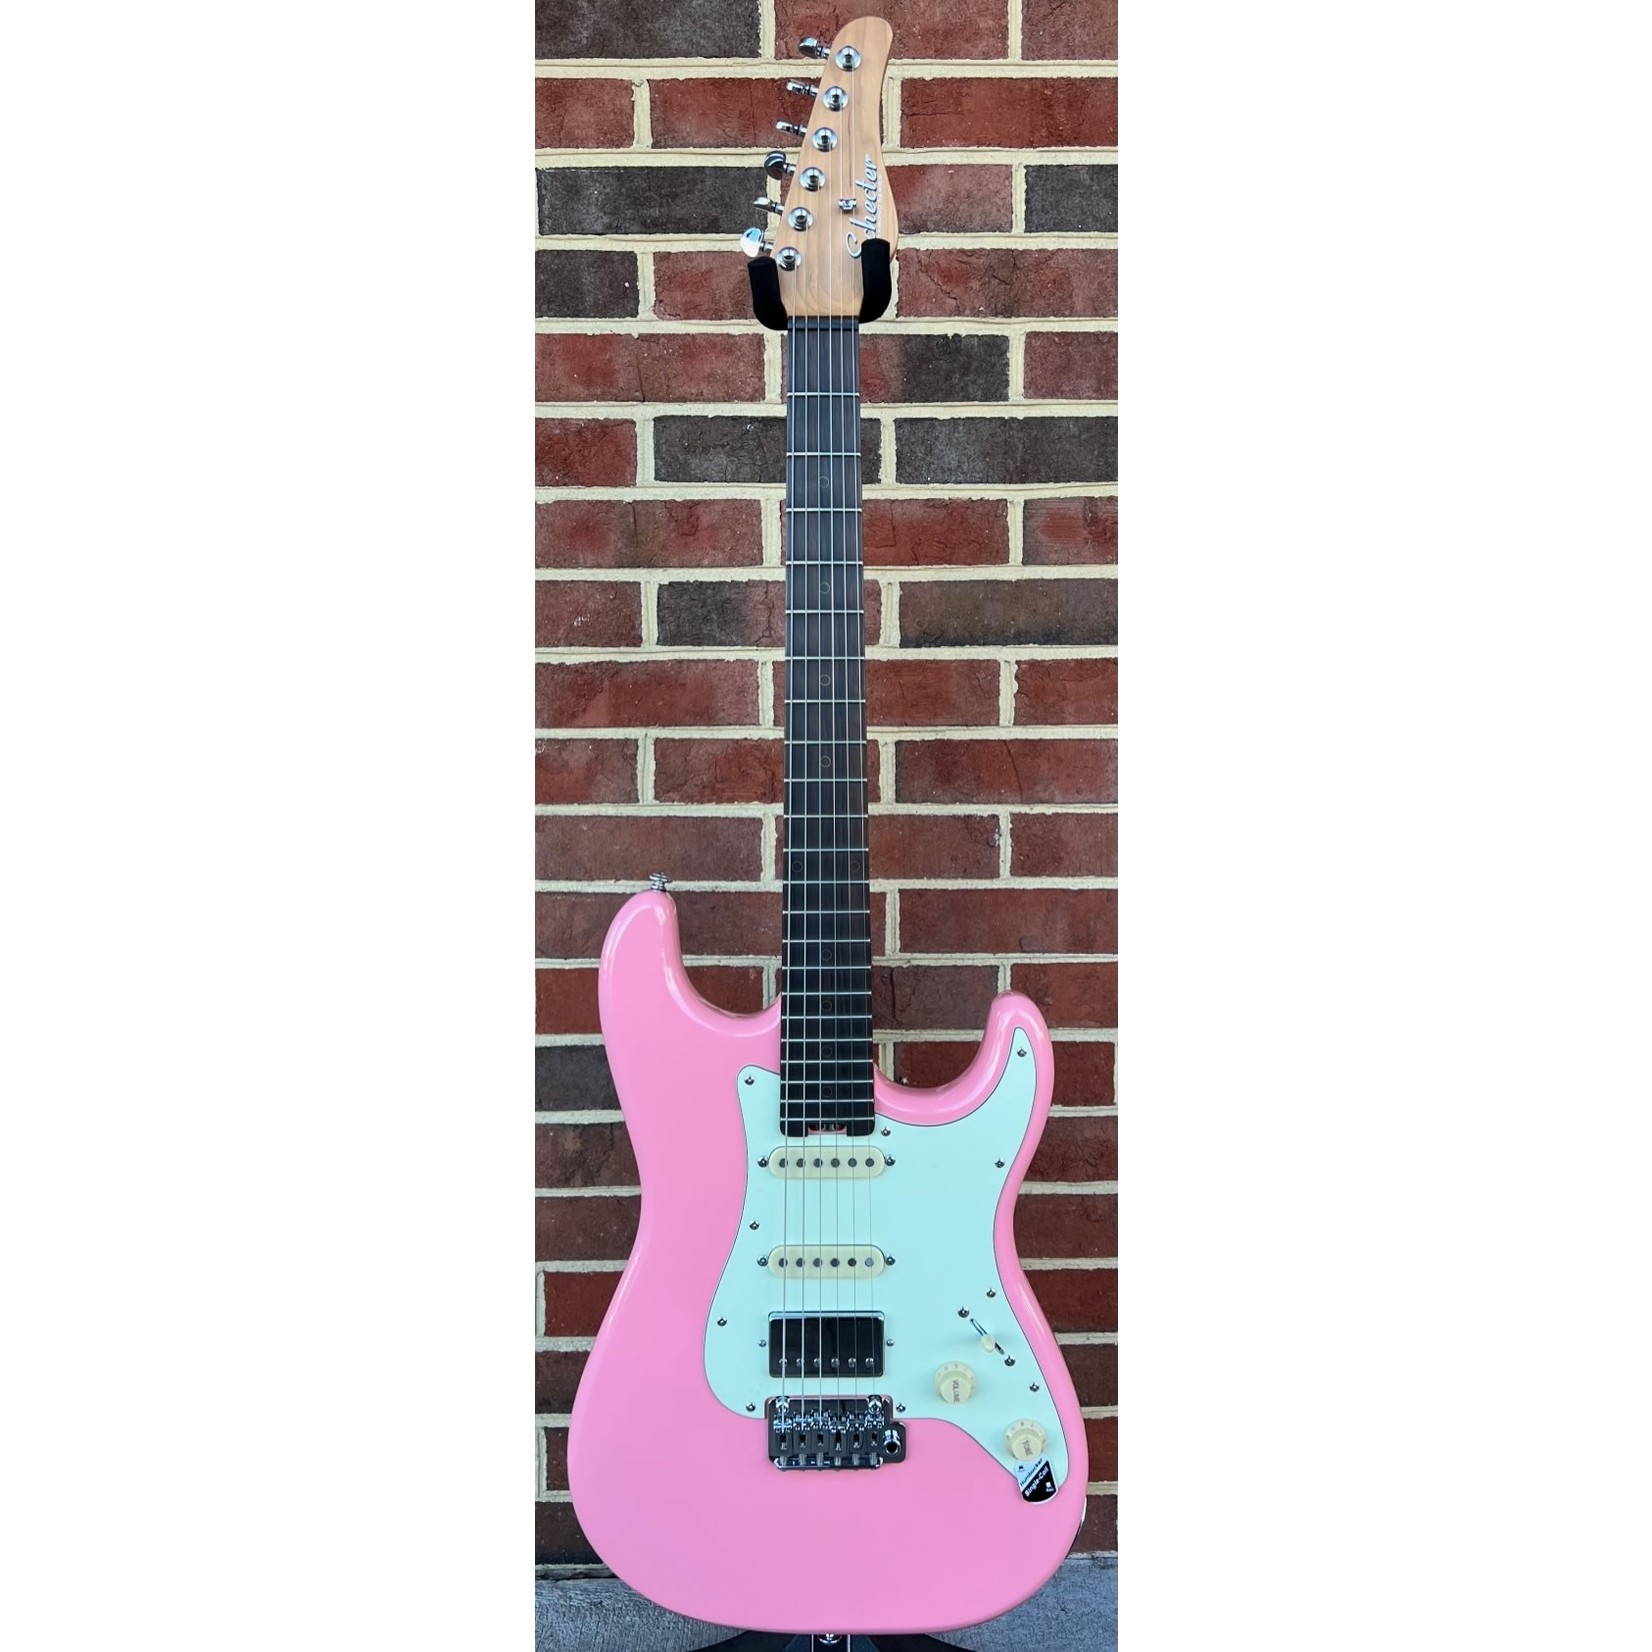 Schecter Guitar Research Schecter Nick Johnston Traditional HSS, Atomic Coral, Roasted Maple Neck, Ebony Fretboard, Locking Tuners